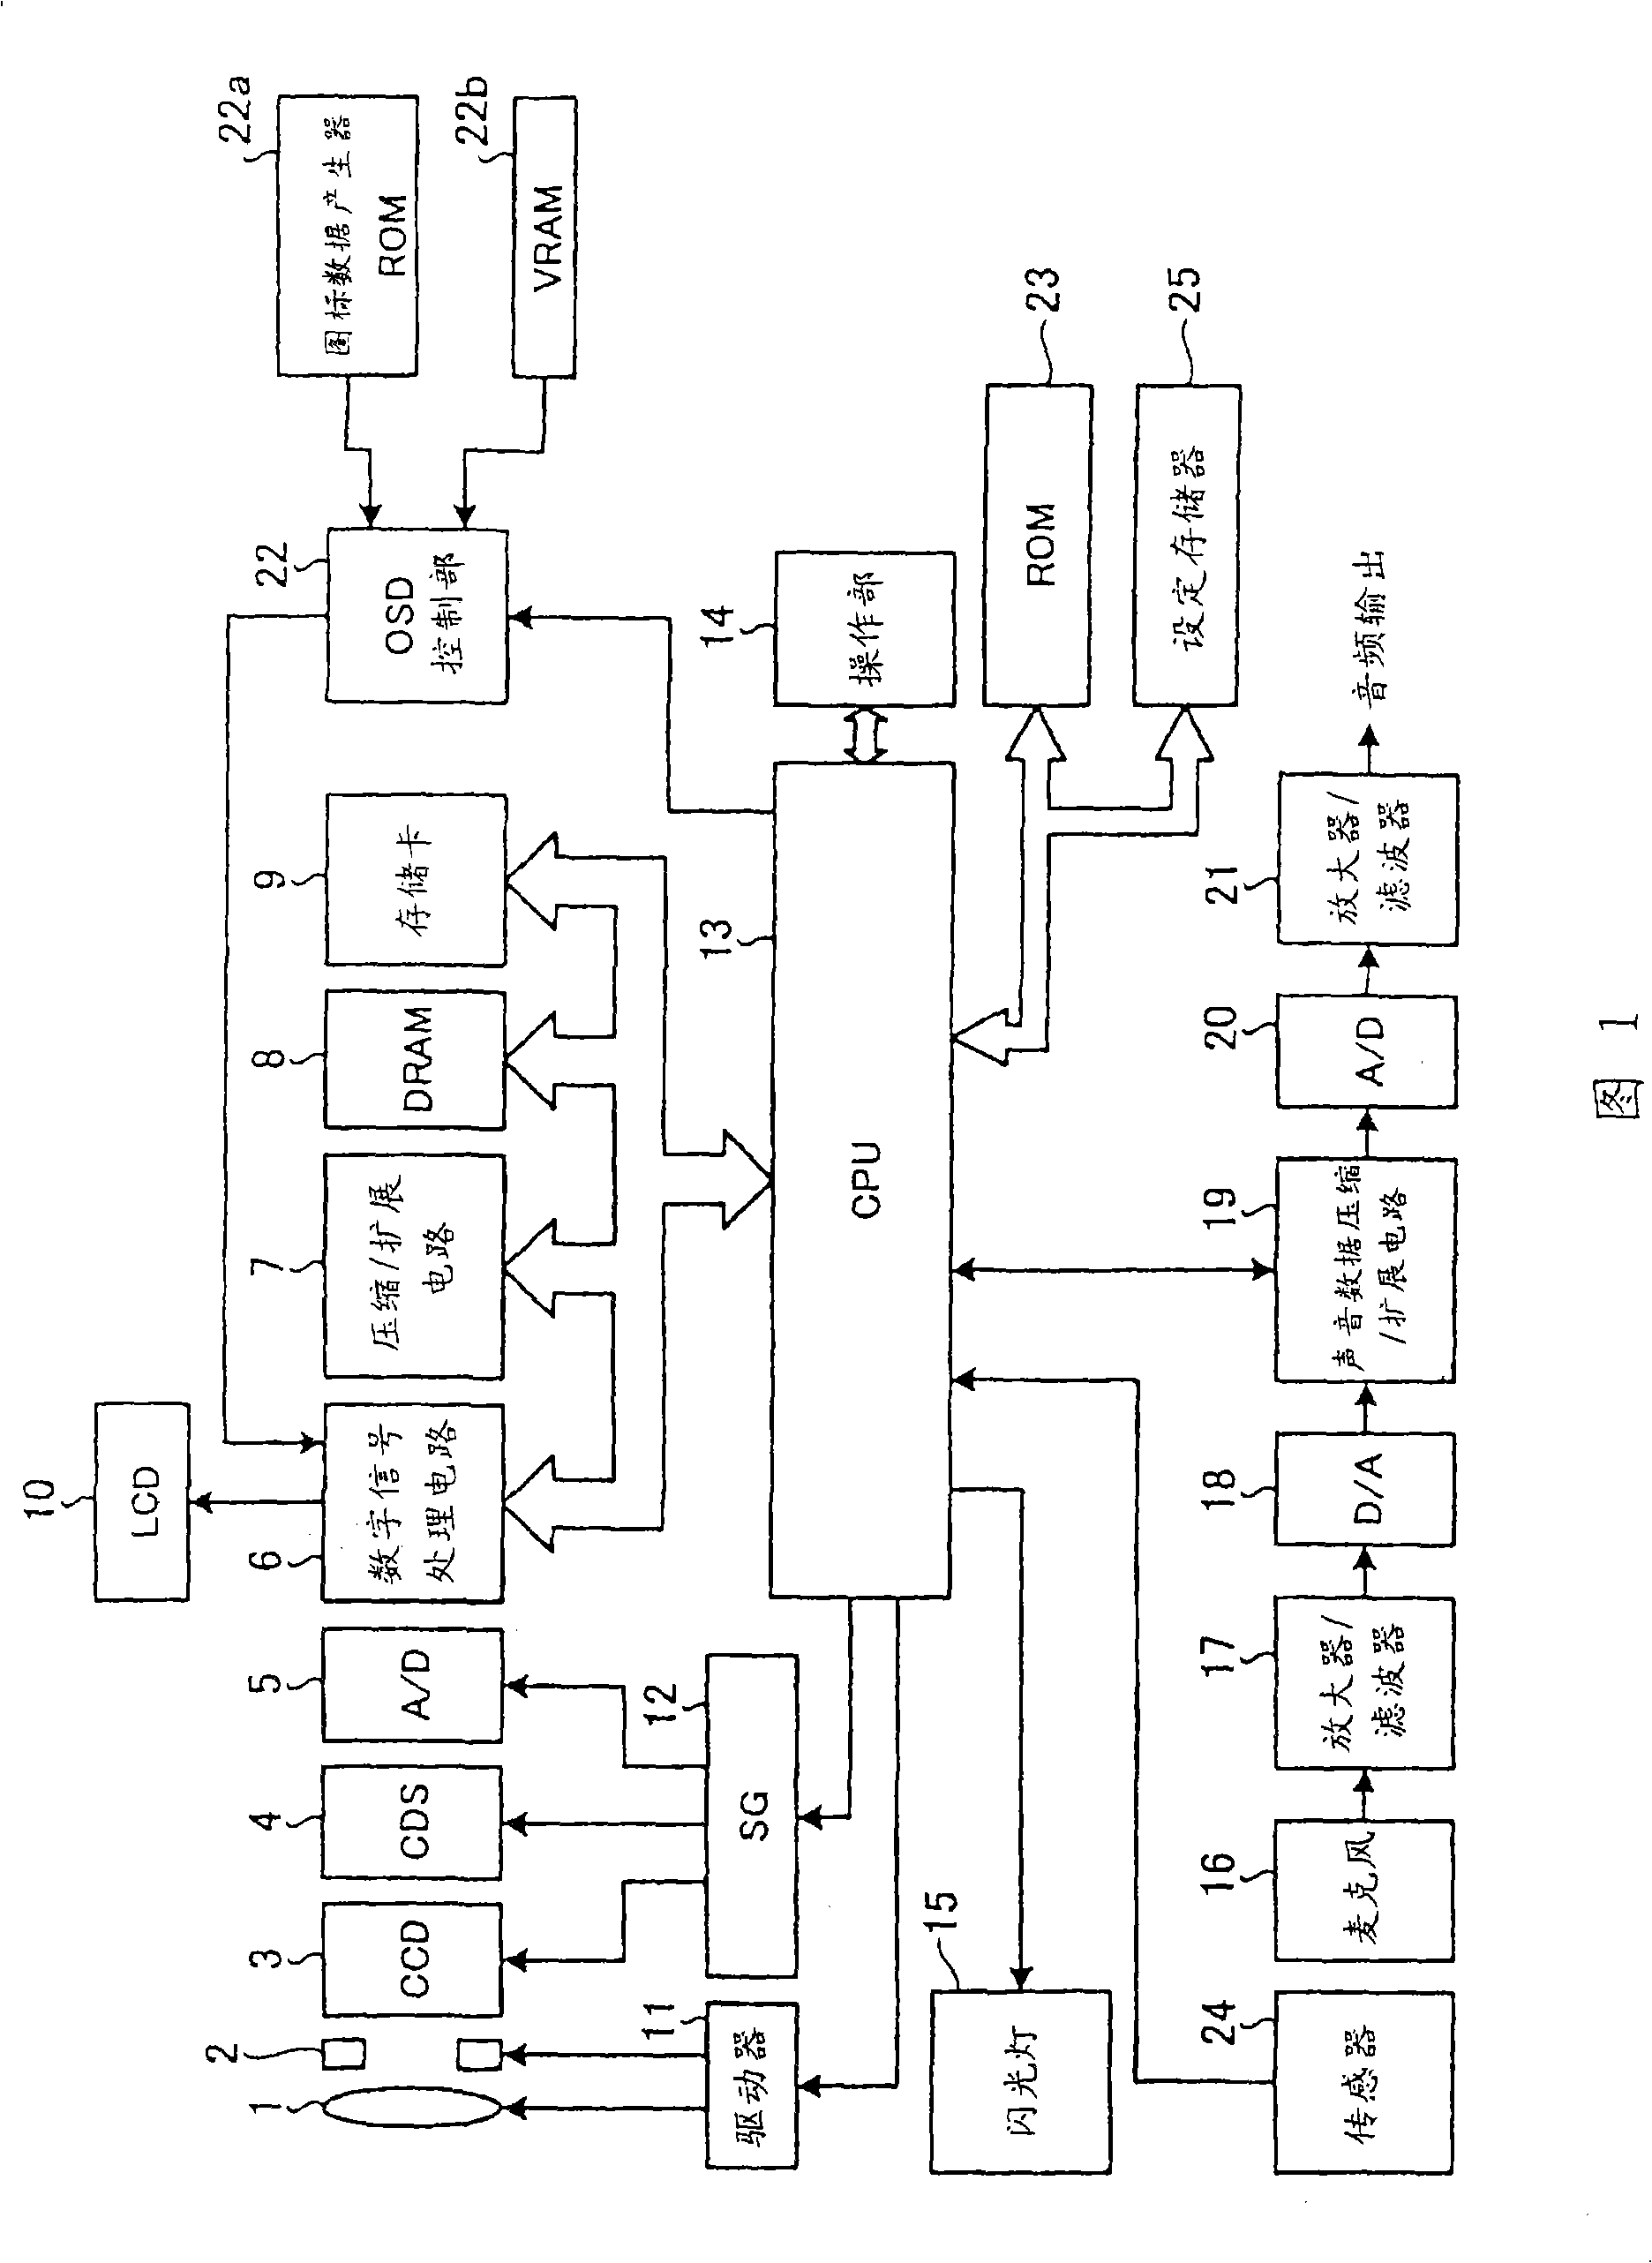 Electronic apparatus with display unit, information-processing method, and program for making computer execute the same method